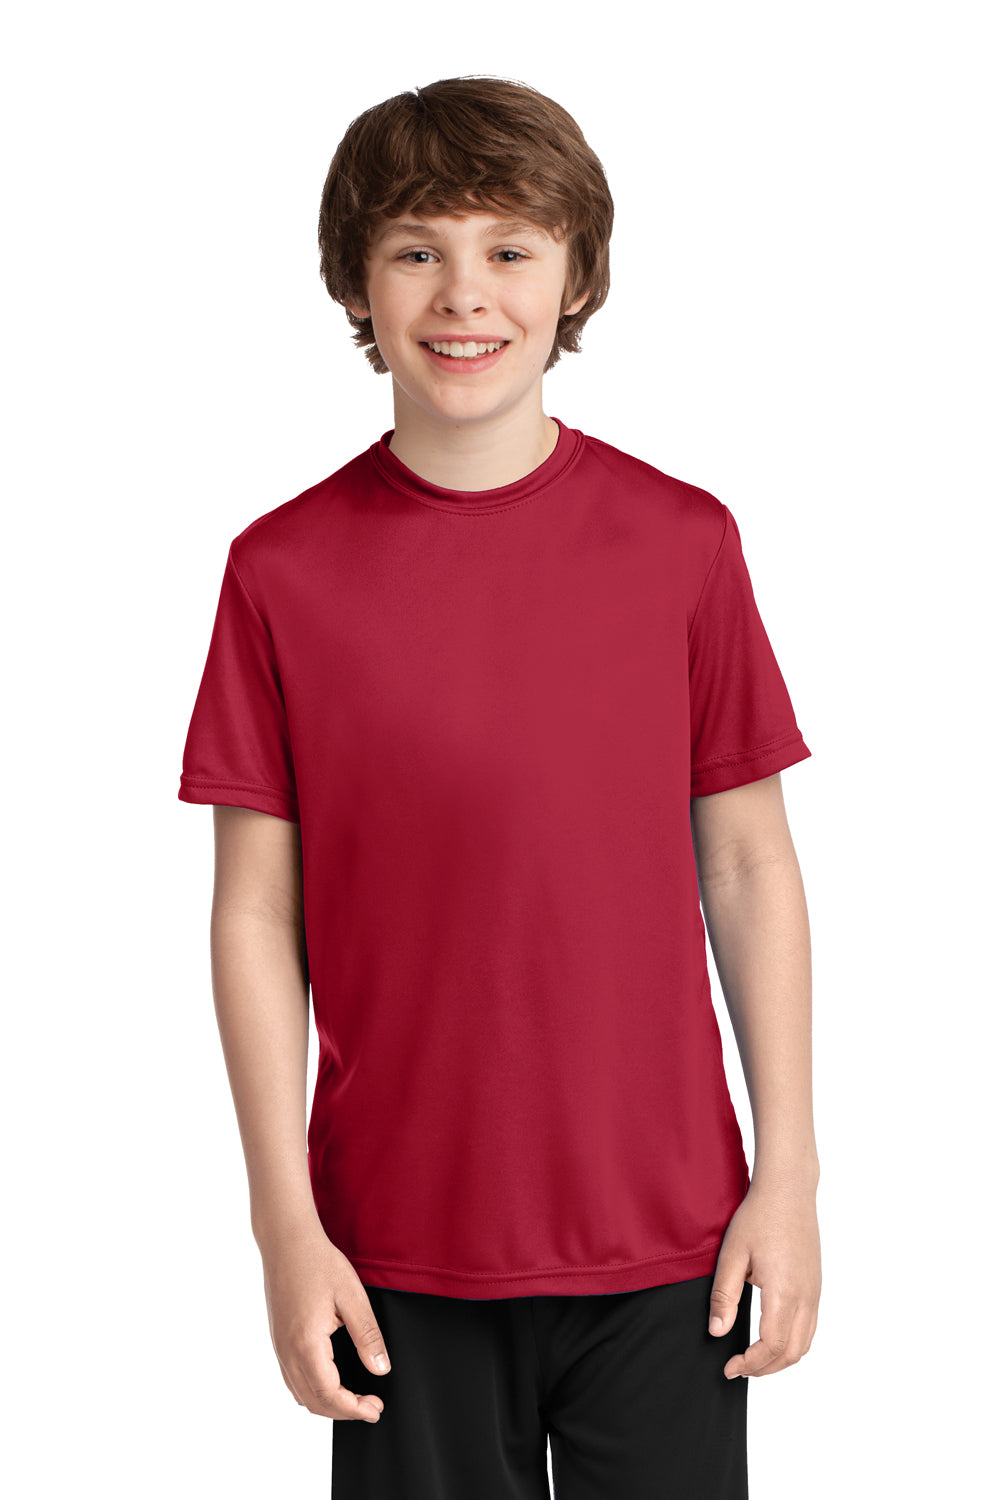 Port & Company PC380Y Youth Dry Zone Performance Moisture Wicking Short Sleeve Crewneck T-Shirt Red Front